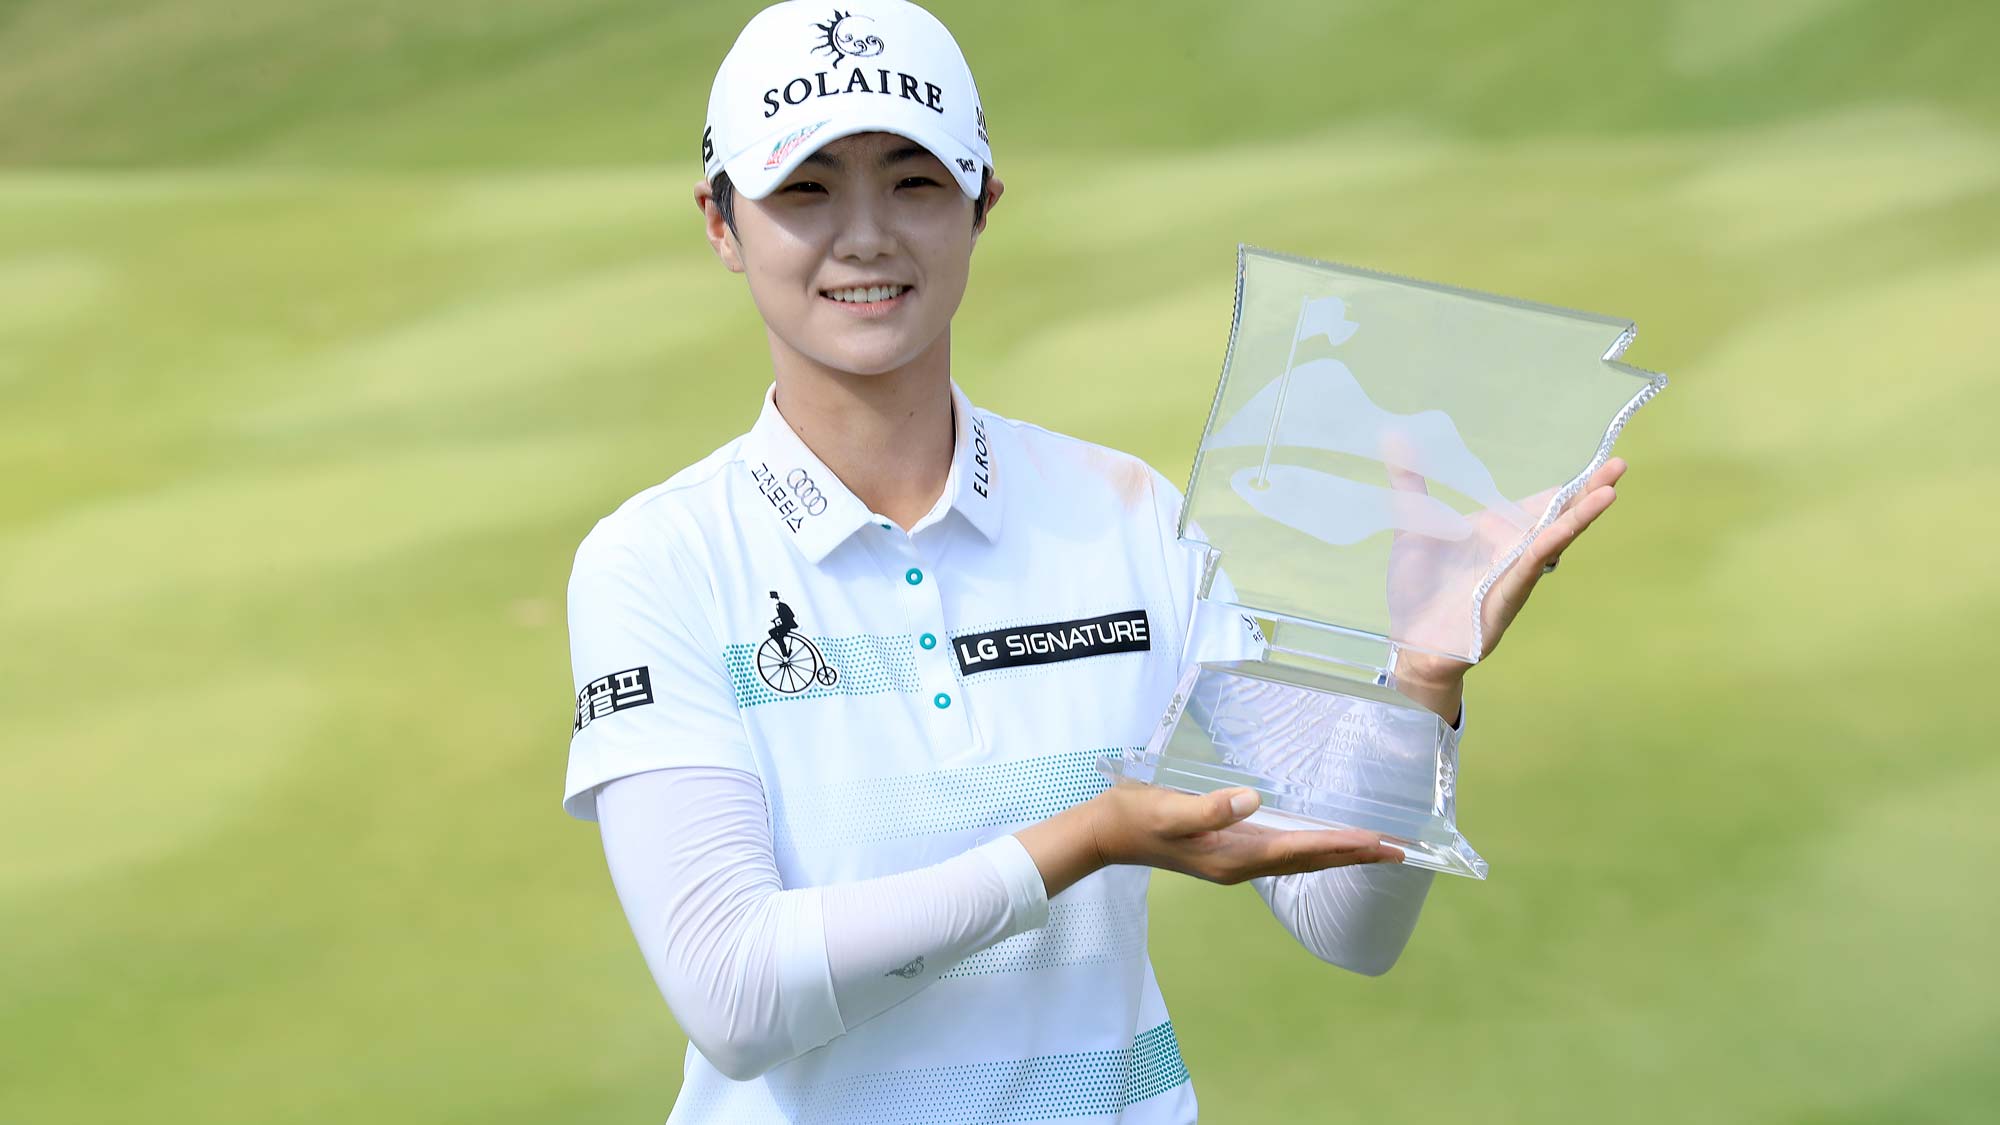 Sung Hyun Park has her #BagsPacked for the 2020 Diamond Resorts Tournament of Champions after her win at the Walmart NW Arkansas Championship